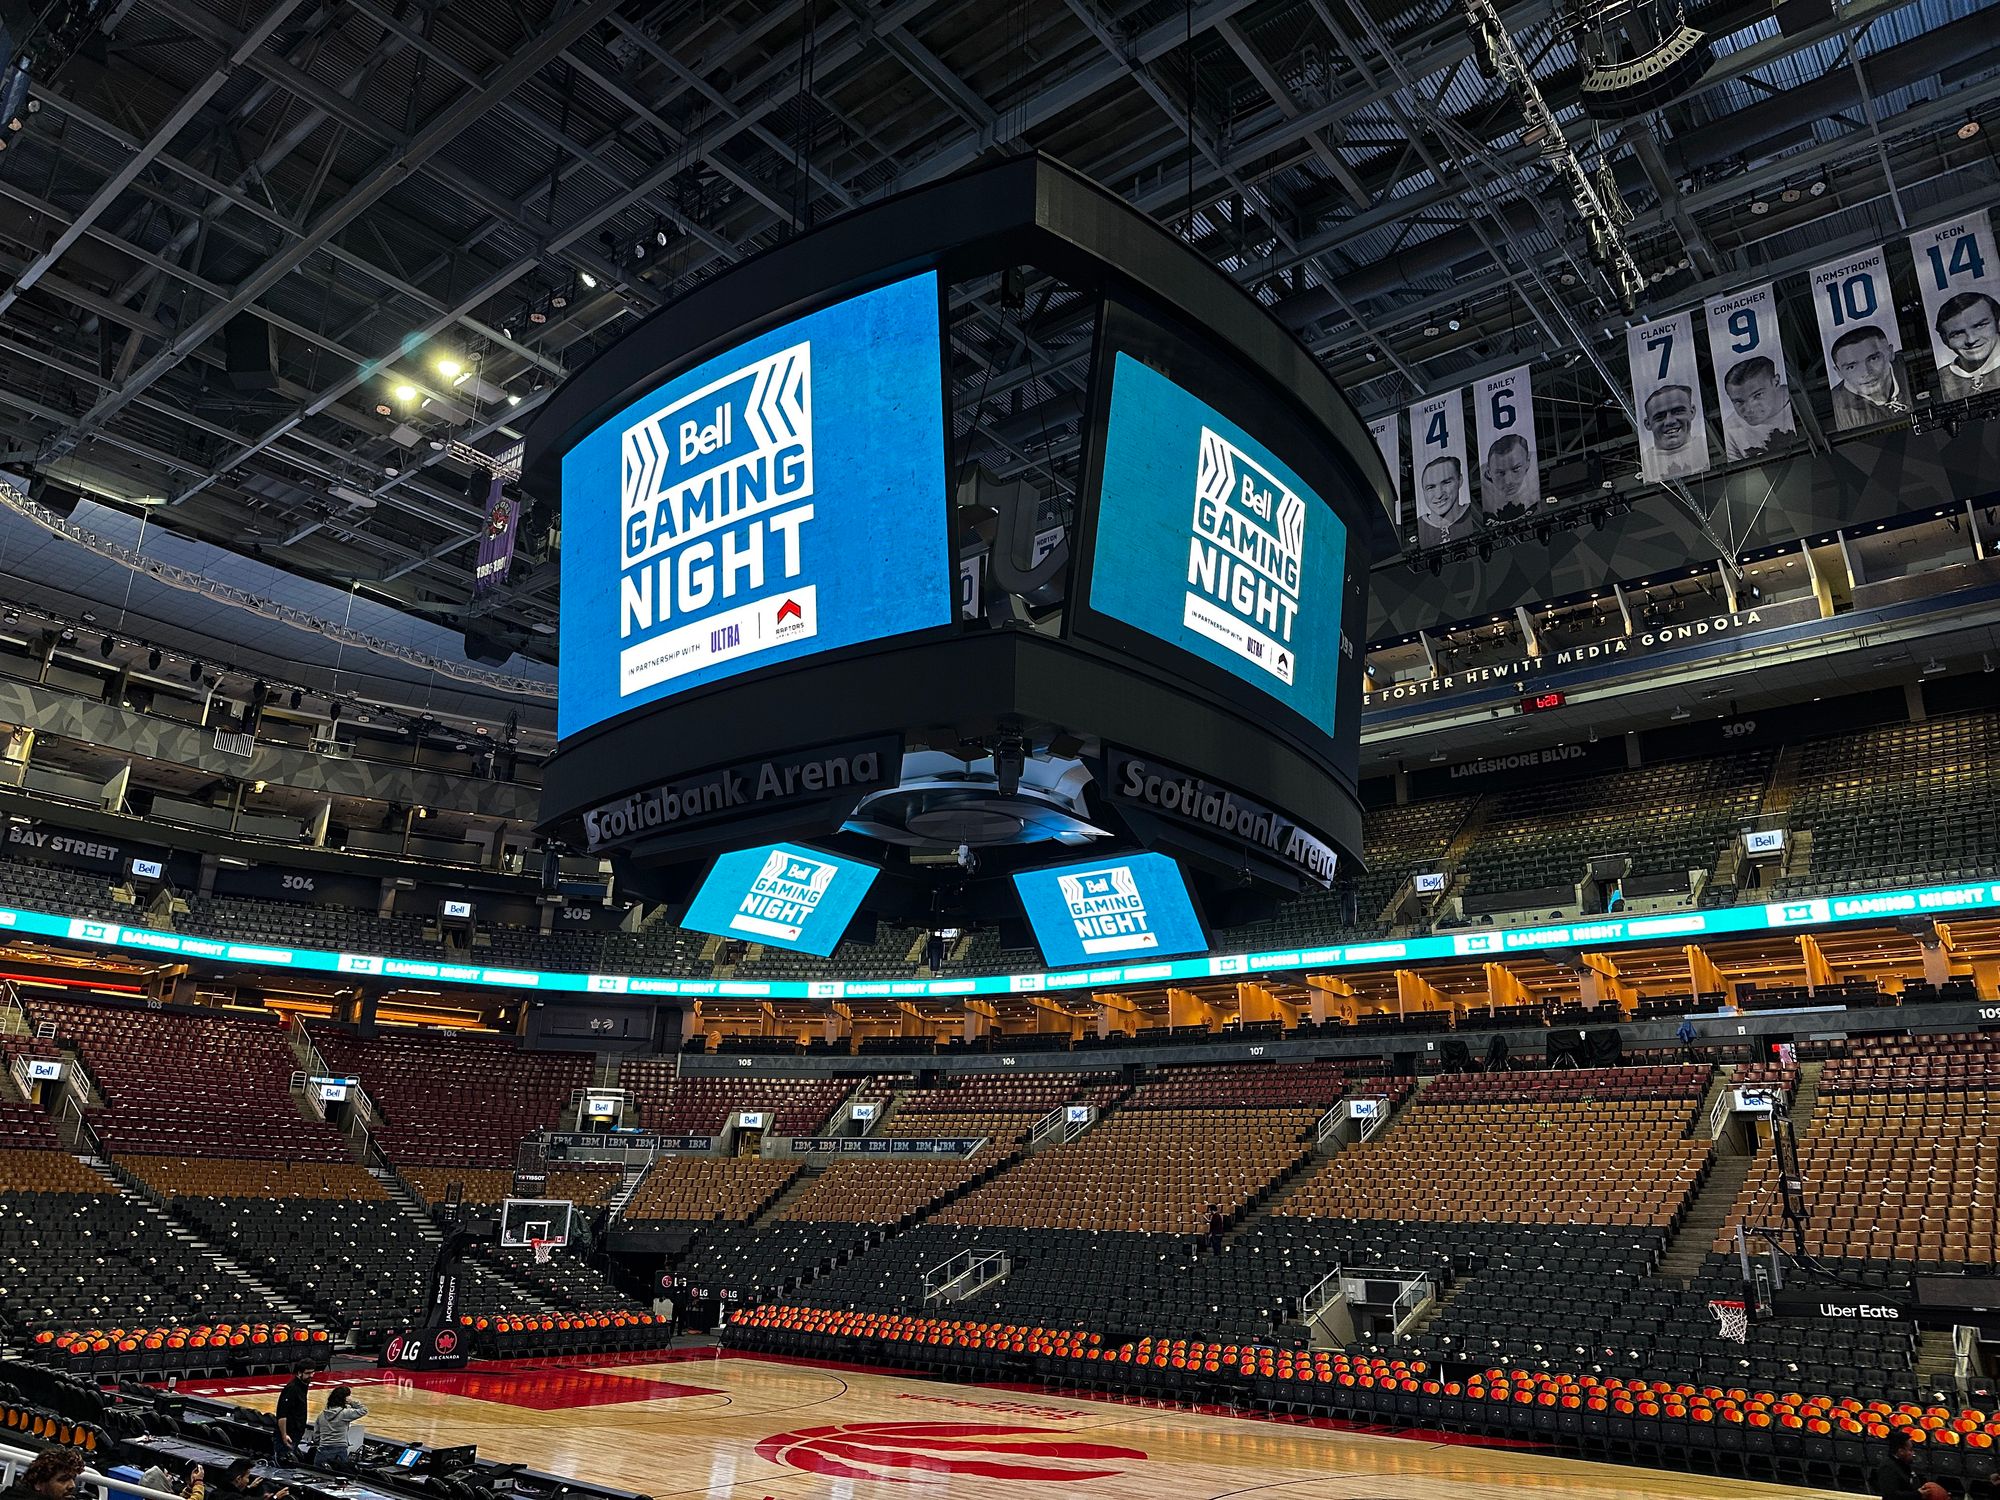 From Courtside to Console: Bell Gaming Night Hits a Slam Dunk